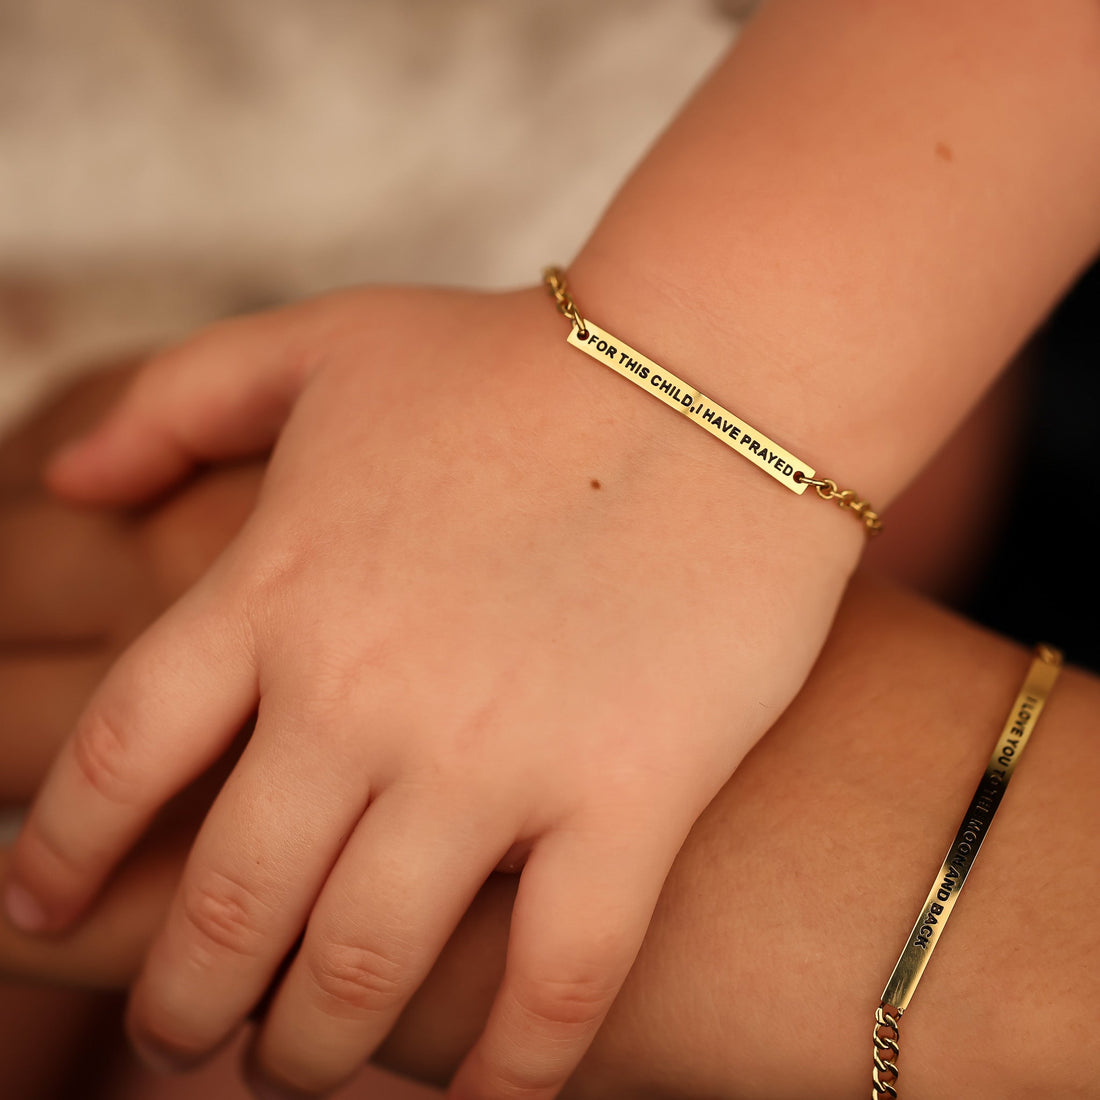 FOR THIS CHILD I HAVE PRAYED - KIDS CHAIN BRACELET - Inspiration Co.